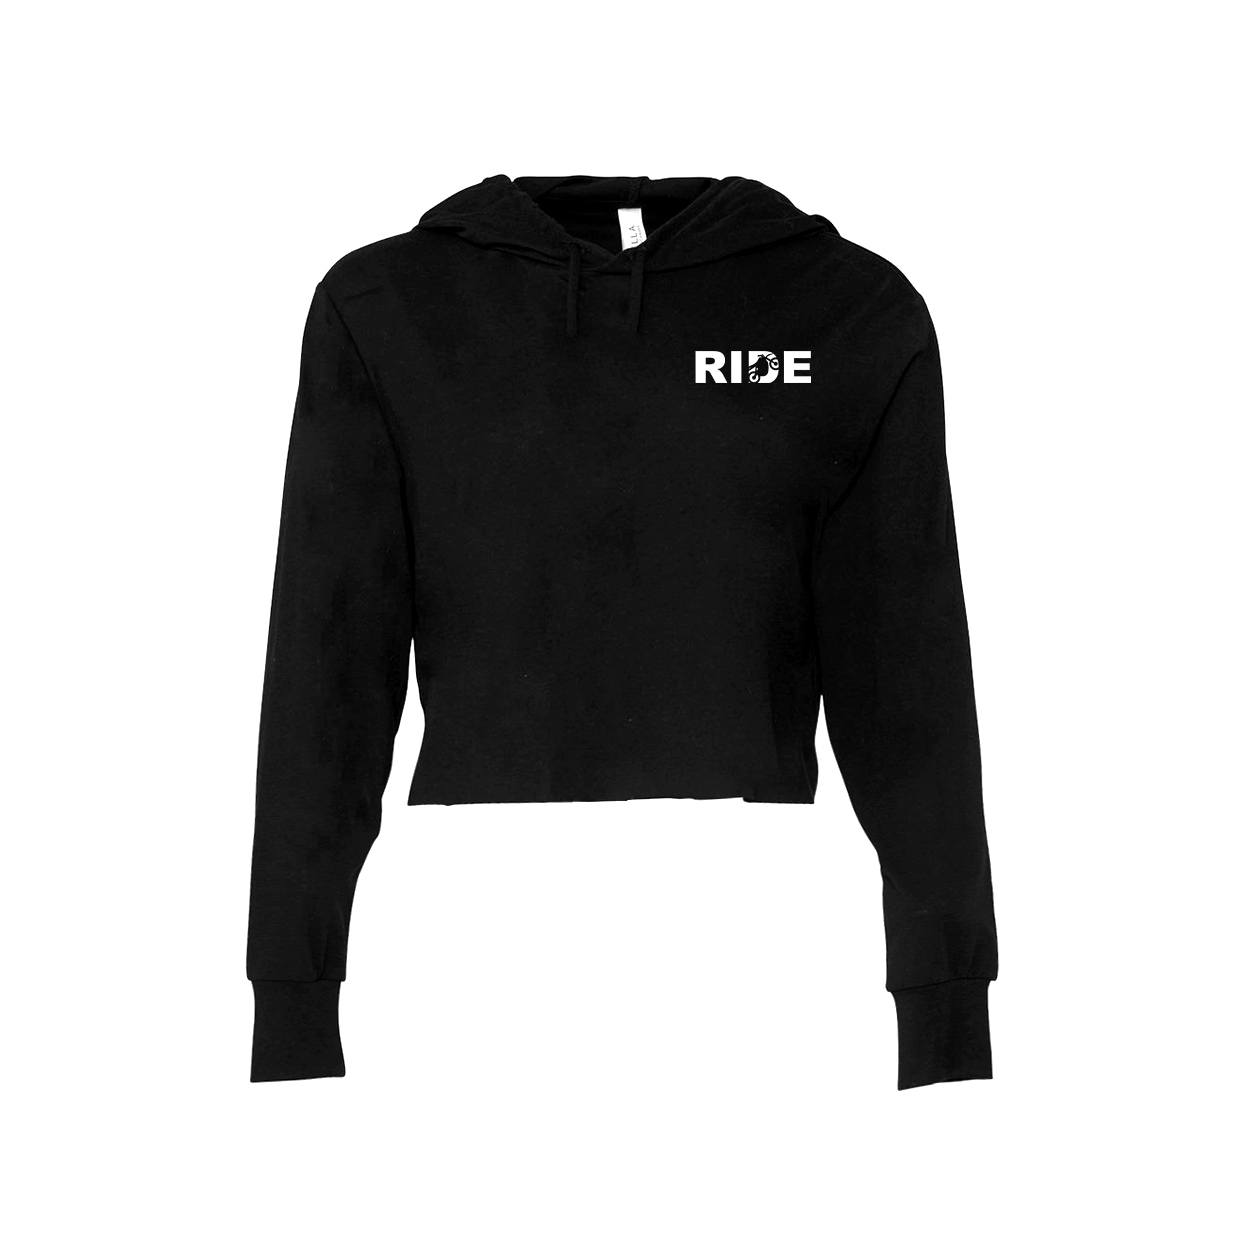 Ride Moto Logo Night Out Womens Long Sleeve Cropped Hooded Tee Black 